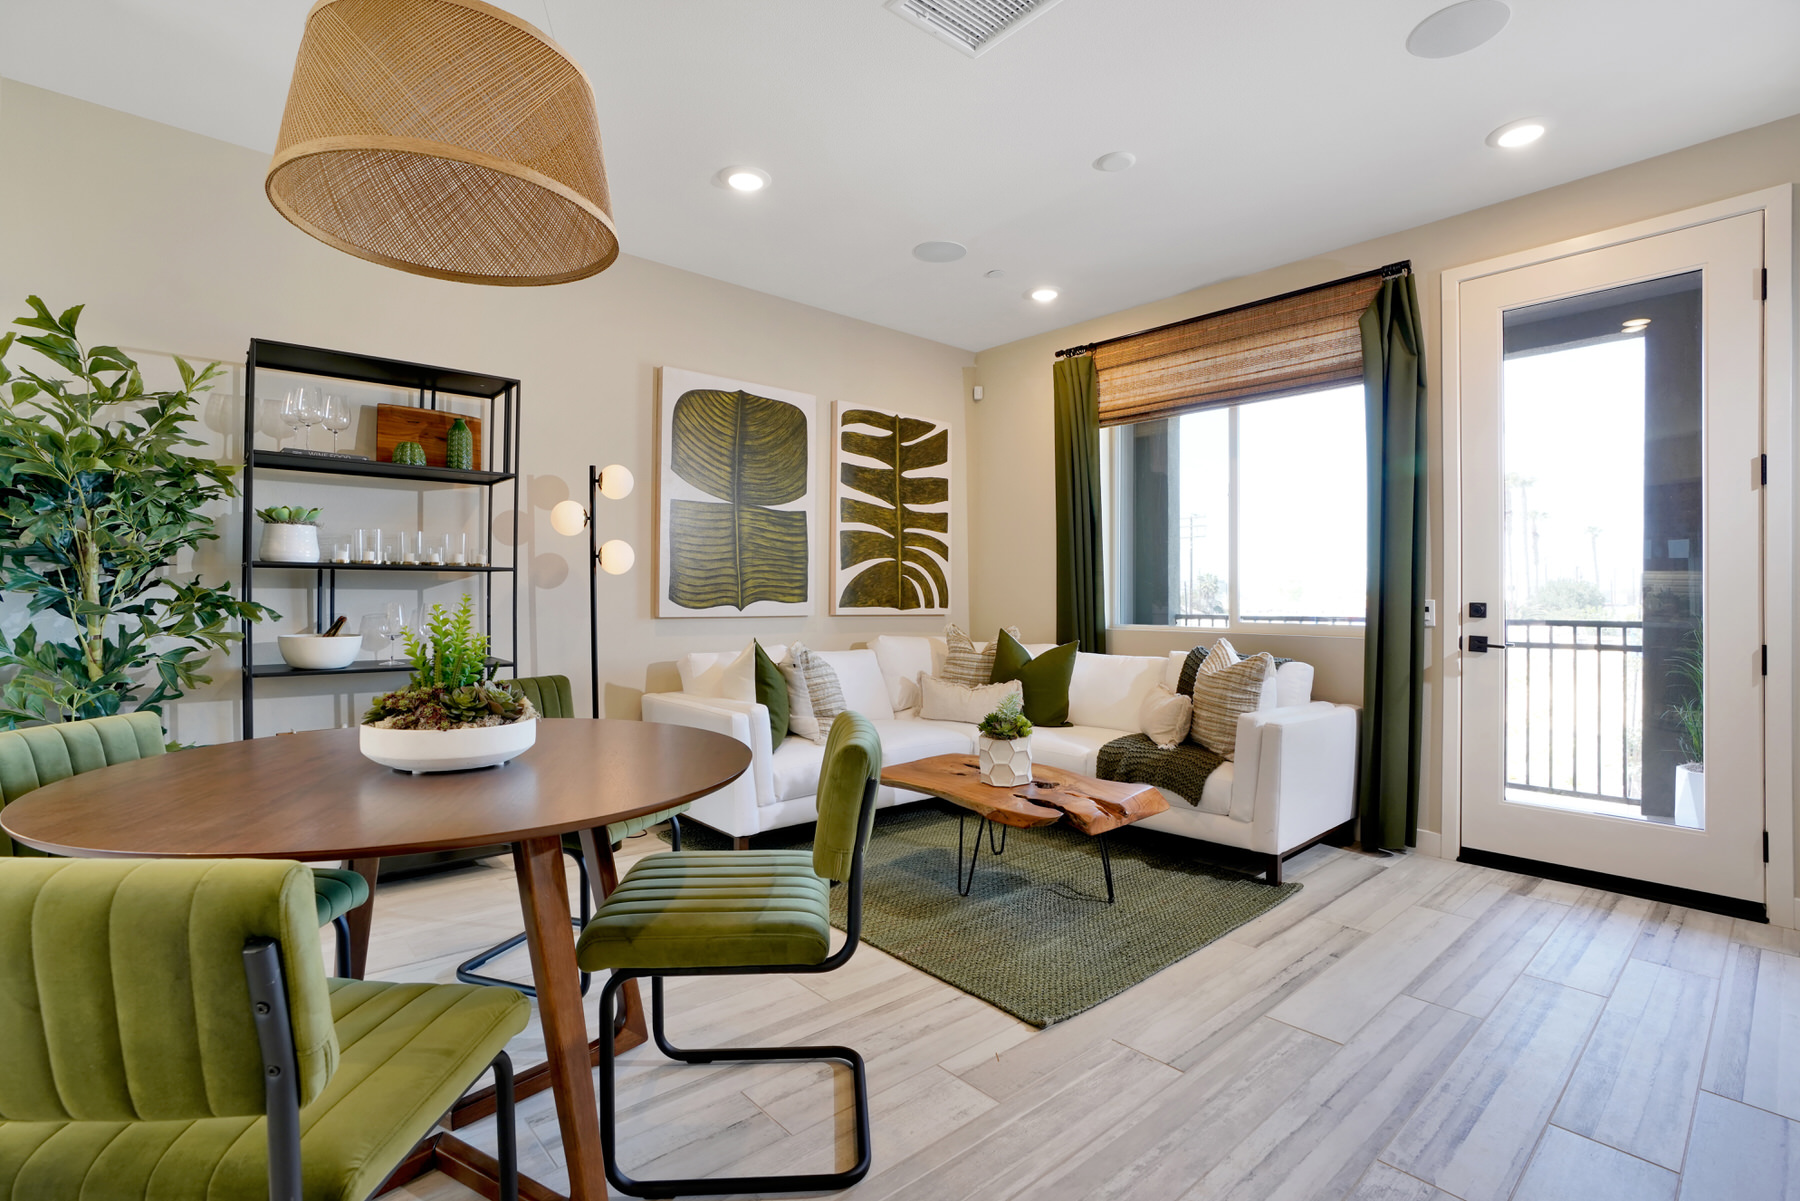 Dining/Living/Balcony in Plan 1 at Moneta Pointe by Melia Homes in Gardena, CA